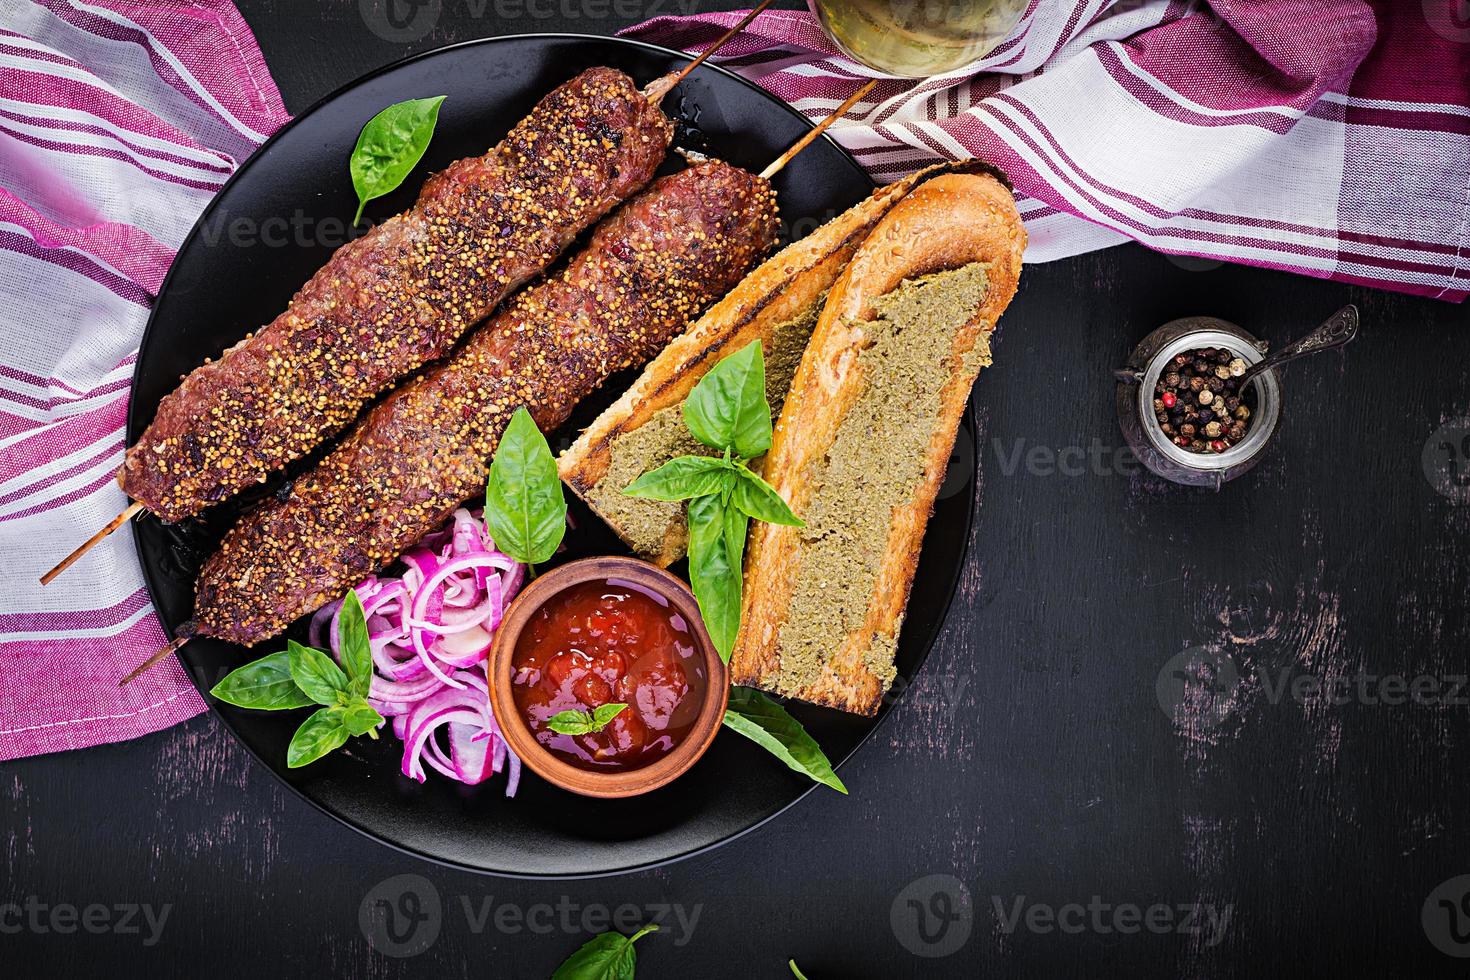 Kebab adana,  lamb and beef and toasts with pesto sauce. Top view photo